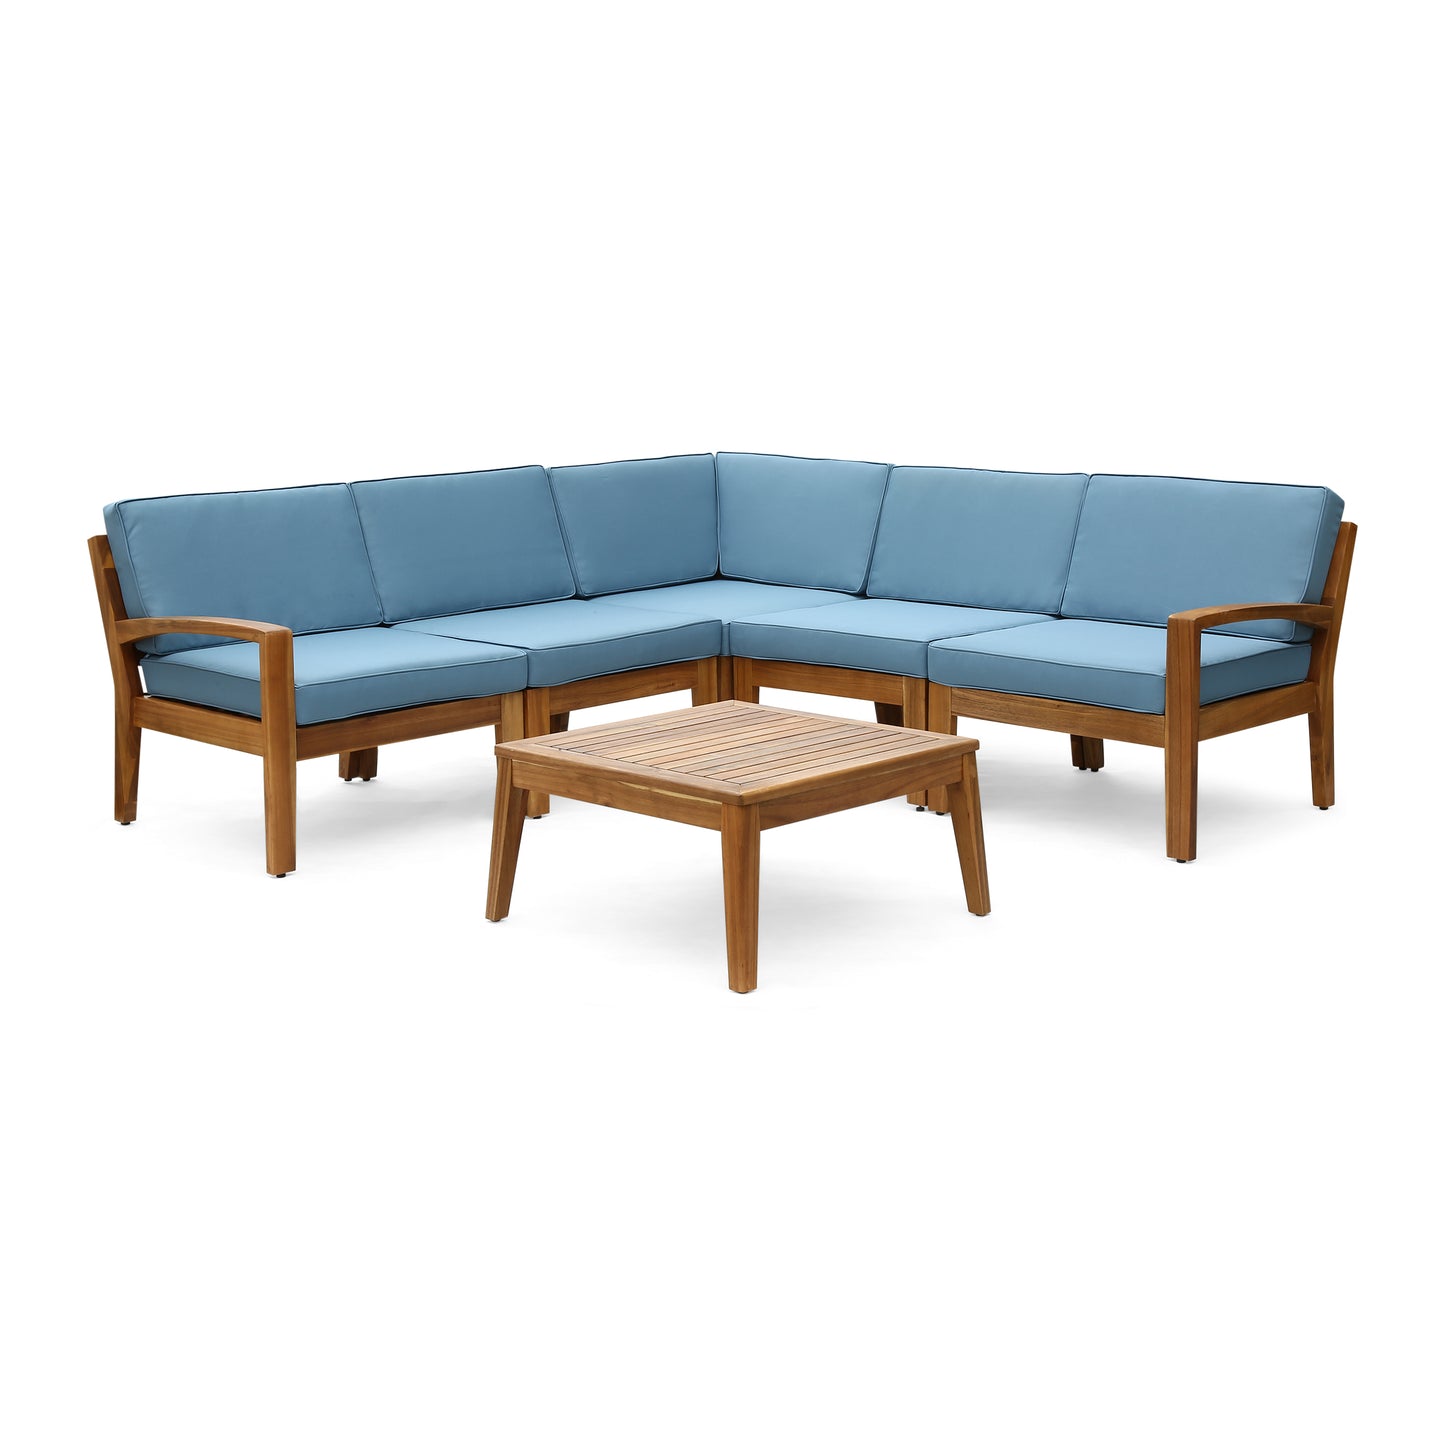 Roy Outdoor Acacia Wood 5 Seater Sectional Sofa Set with Coffee Table